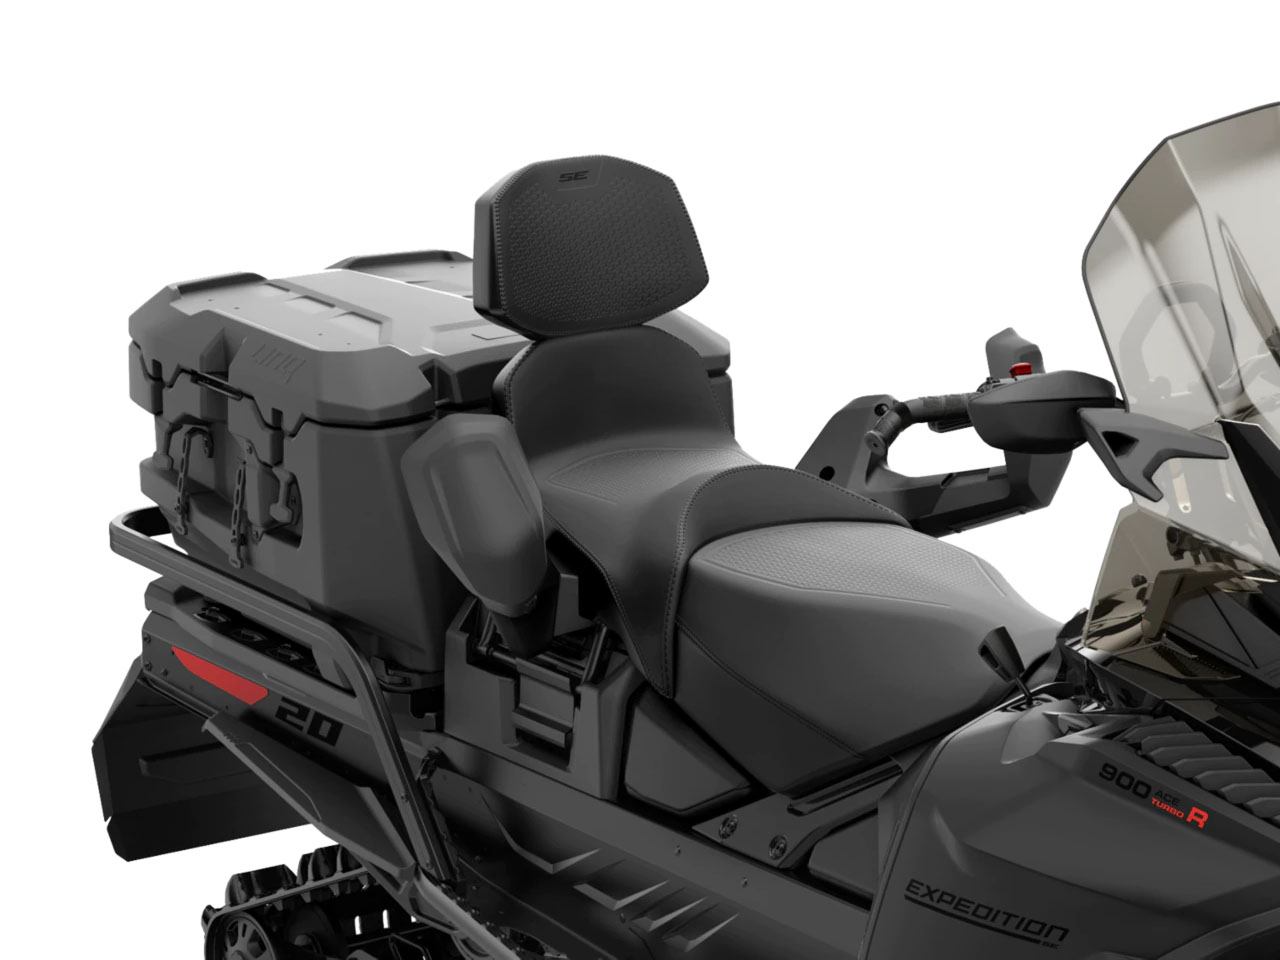 2024 Ski-Doo Expedition LE 900 ACE Turbo ES Silent Cobra WT 1.5 Track 24 in. in Fort Collins, Colorado - Photo 7